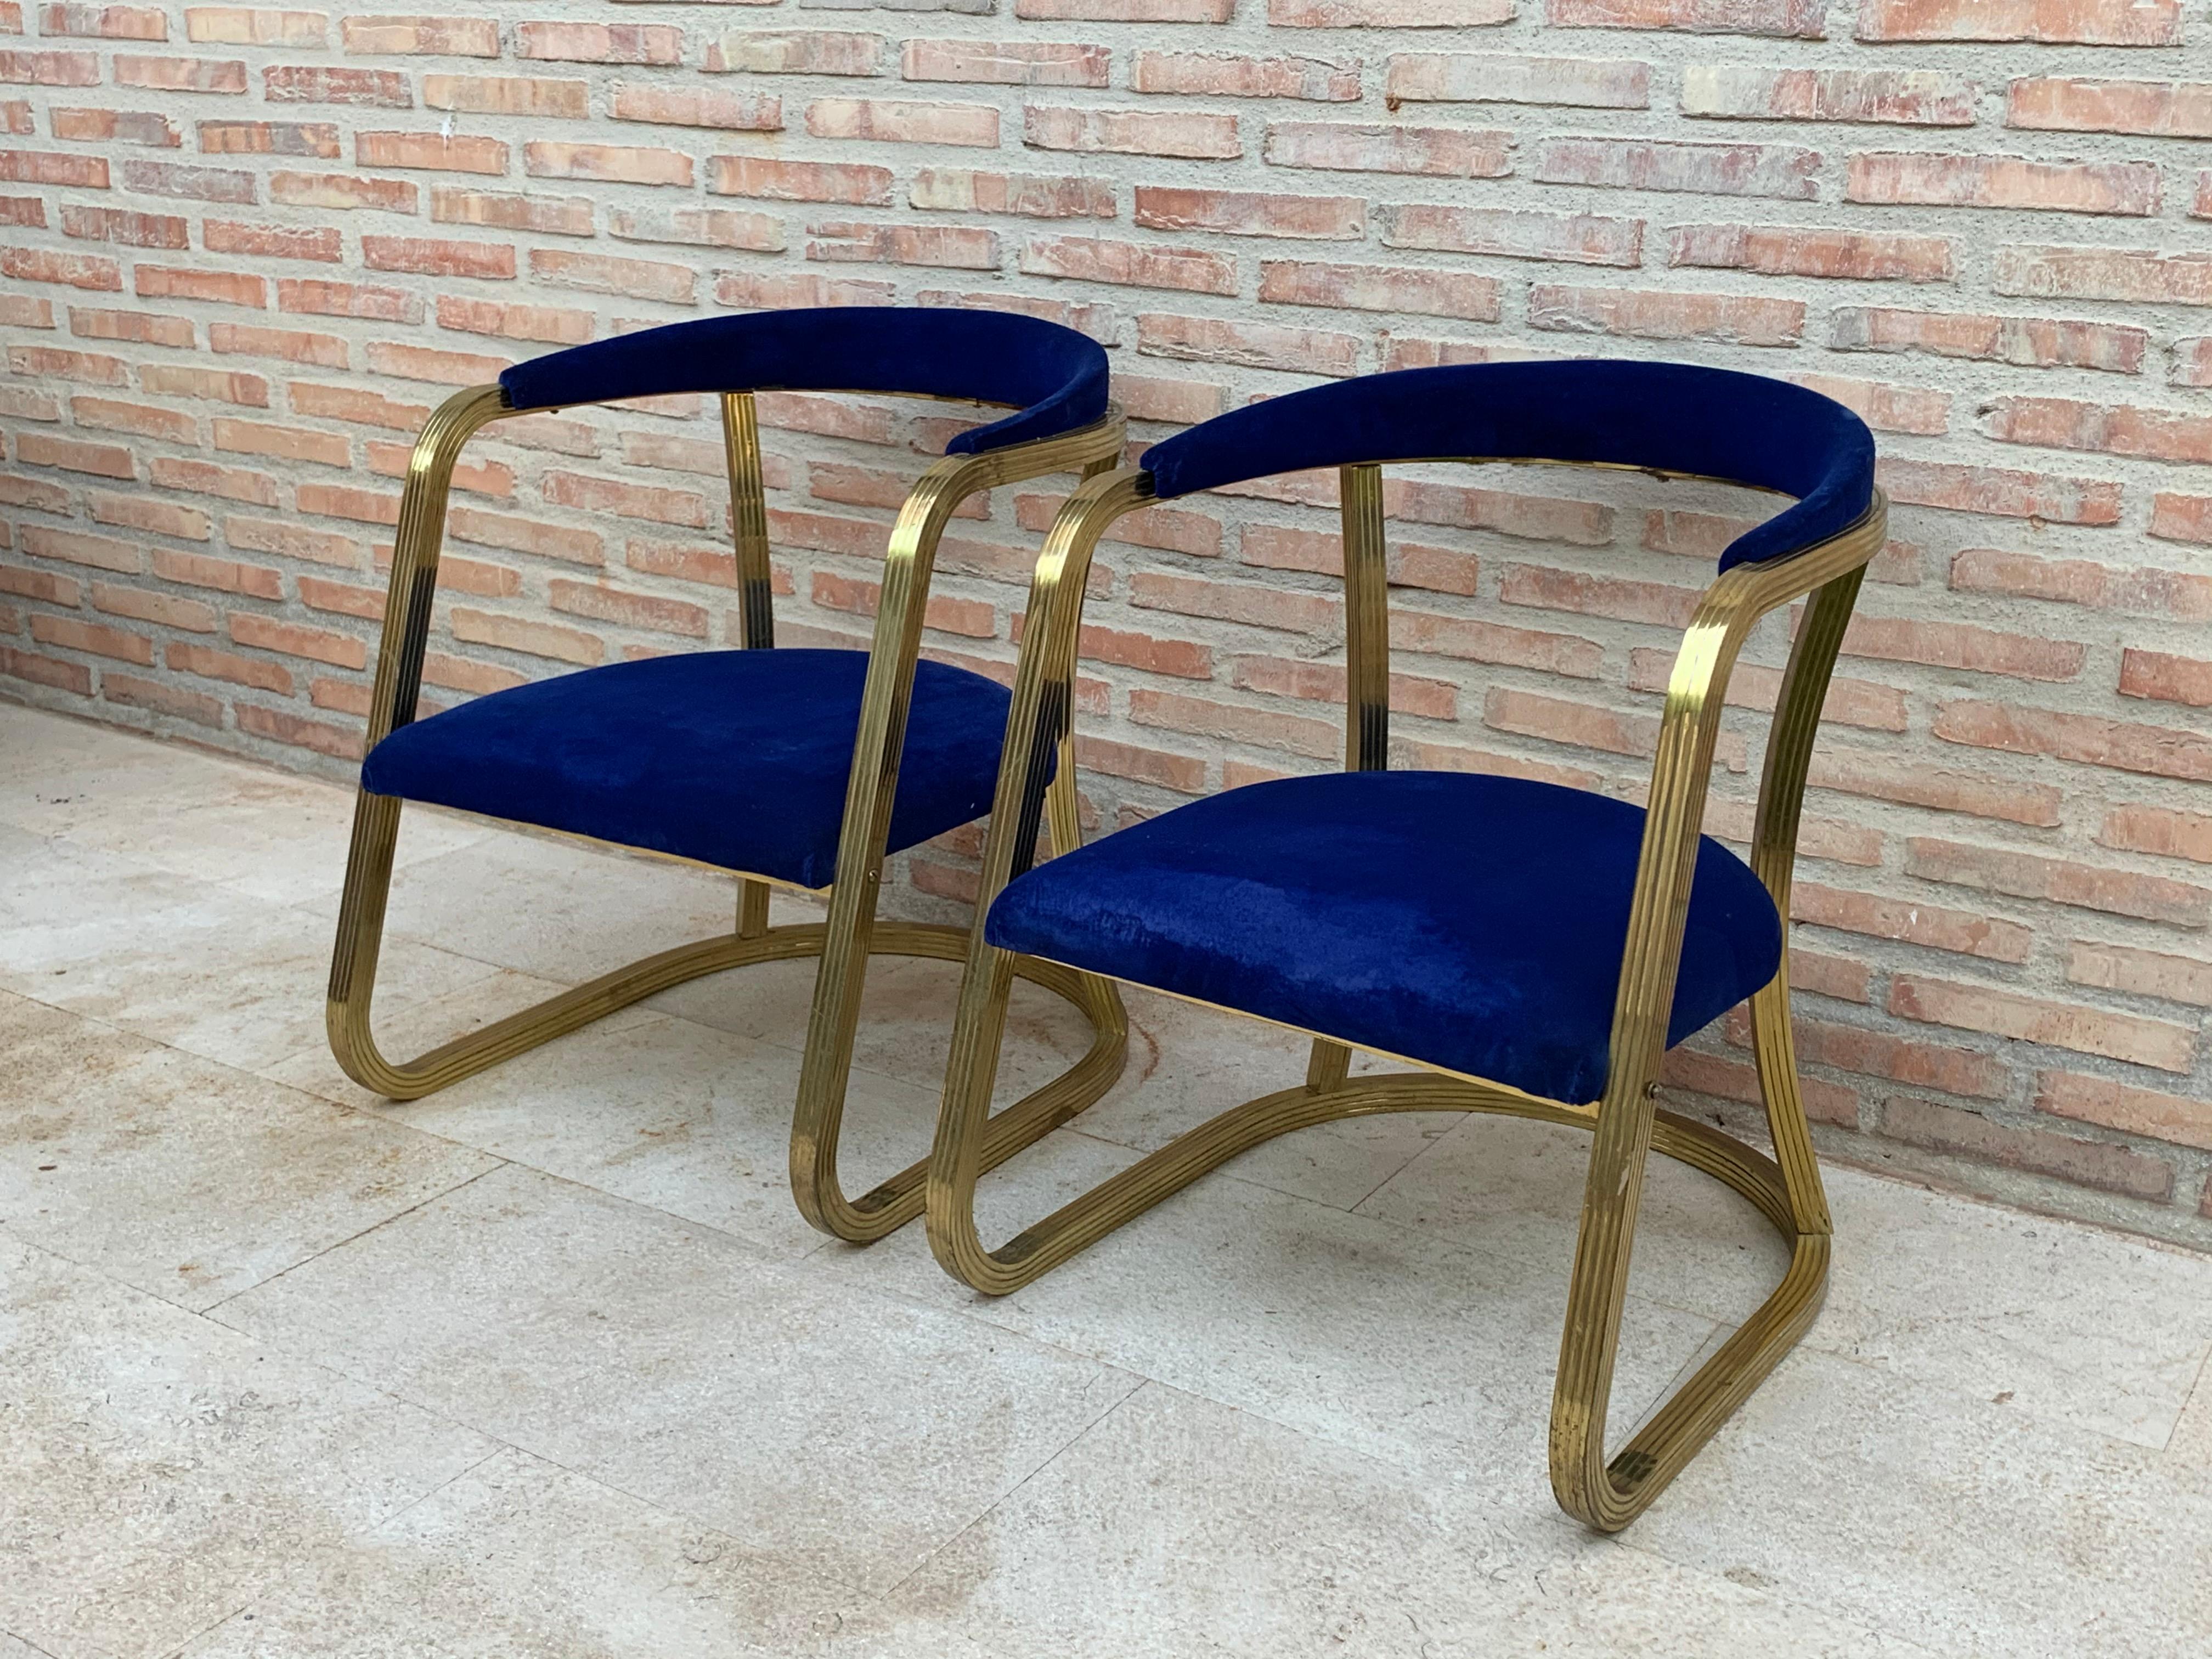 Pair of midcentury brass chairs with blue velvet upholstery
Very comfortable chairs with seat and back in original blue velvet in very good condition.